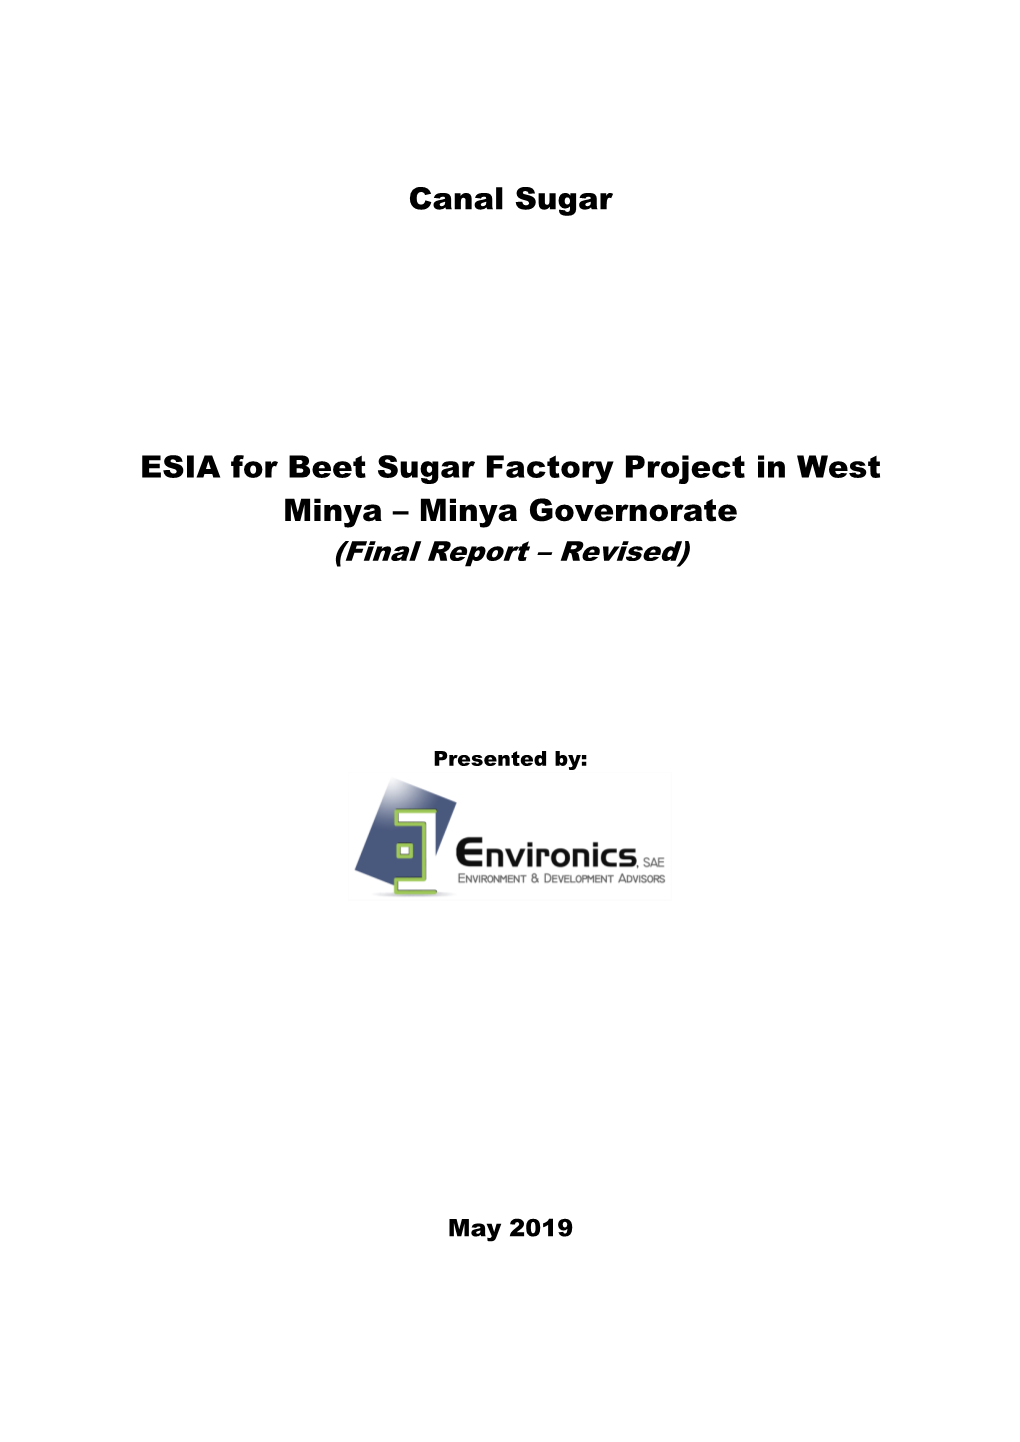 Canal Sugar ESIA for Beet Sugar Factory Project in West Minya